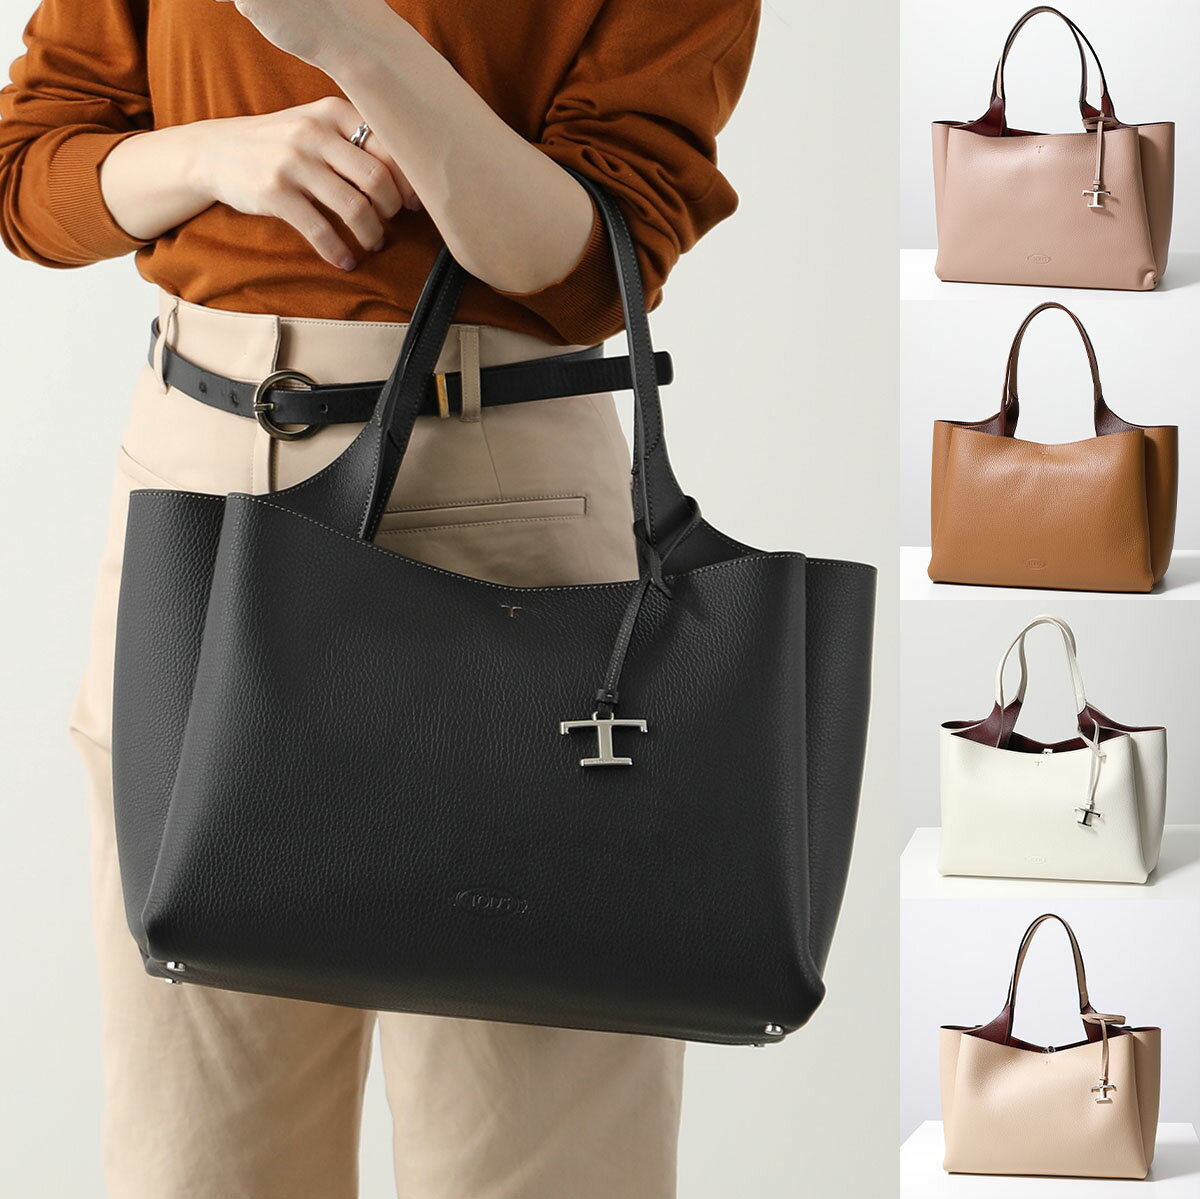 TODS トッズ トートバッグ XBWAPAF9300QRI レディース T TIMELESS Tタイムレス レザー ミディアム 鞄 カラー5色【po_fifth】